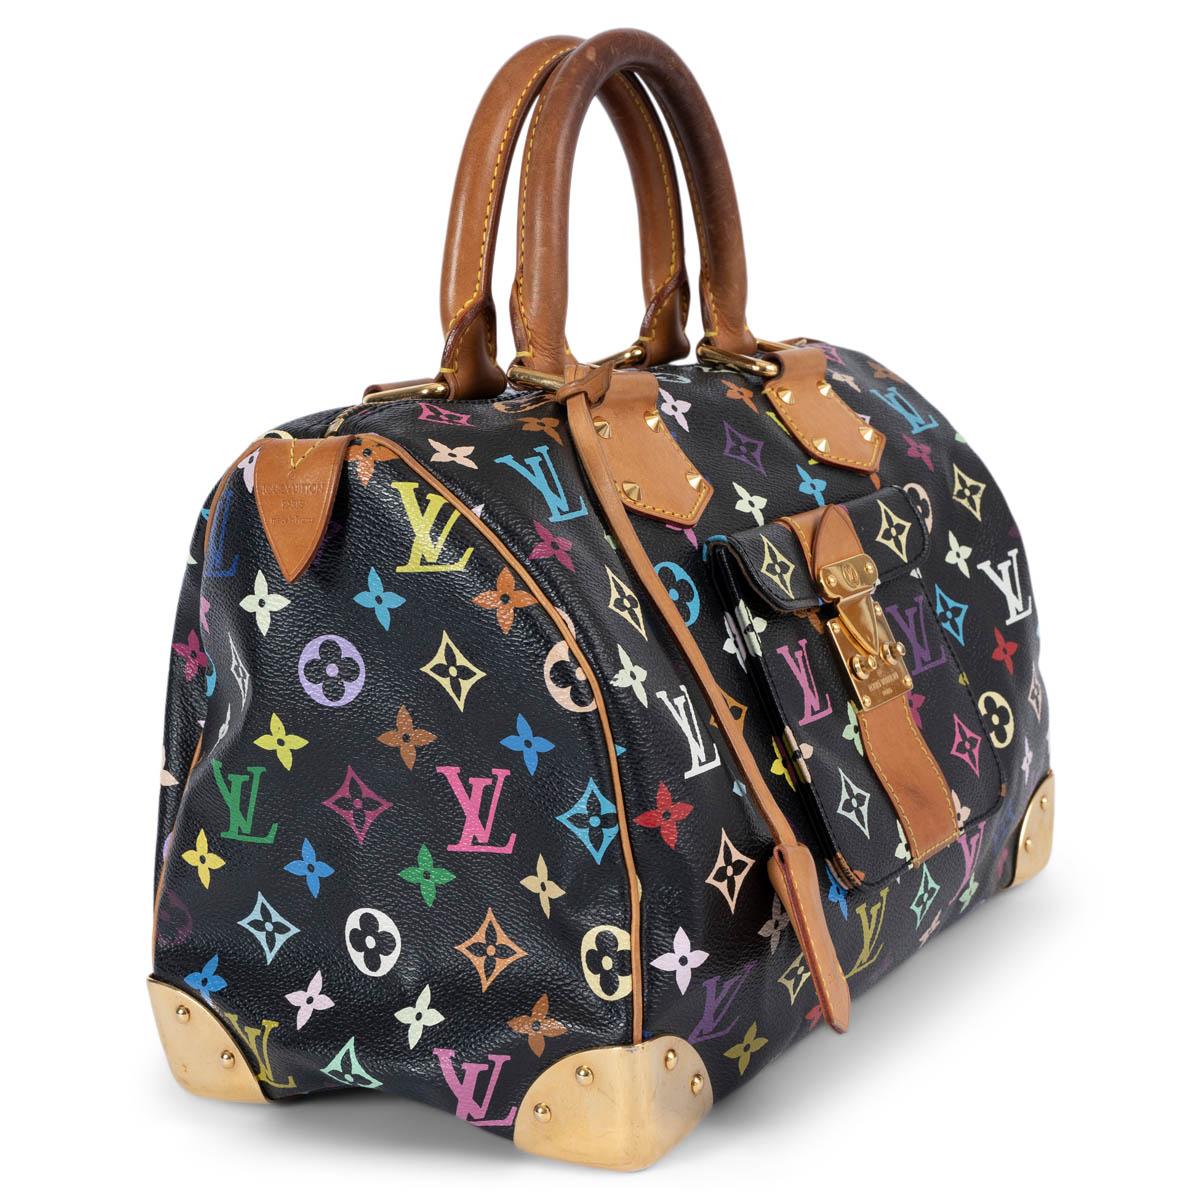 100% authentic Louis Vuitton limited edition Speedy 30 in collaboration with artist Takashi Murakami for SS 2003  in black Monogram Multicolore canvas. Features a flap pocket with push-lock on the front, brass corners and leather clochette and